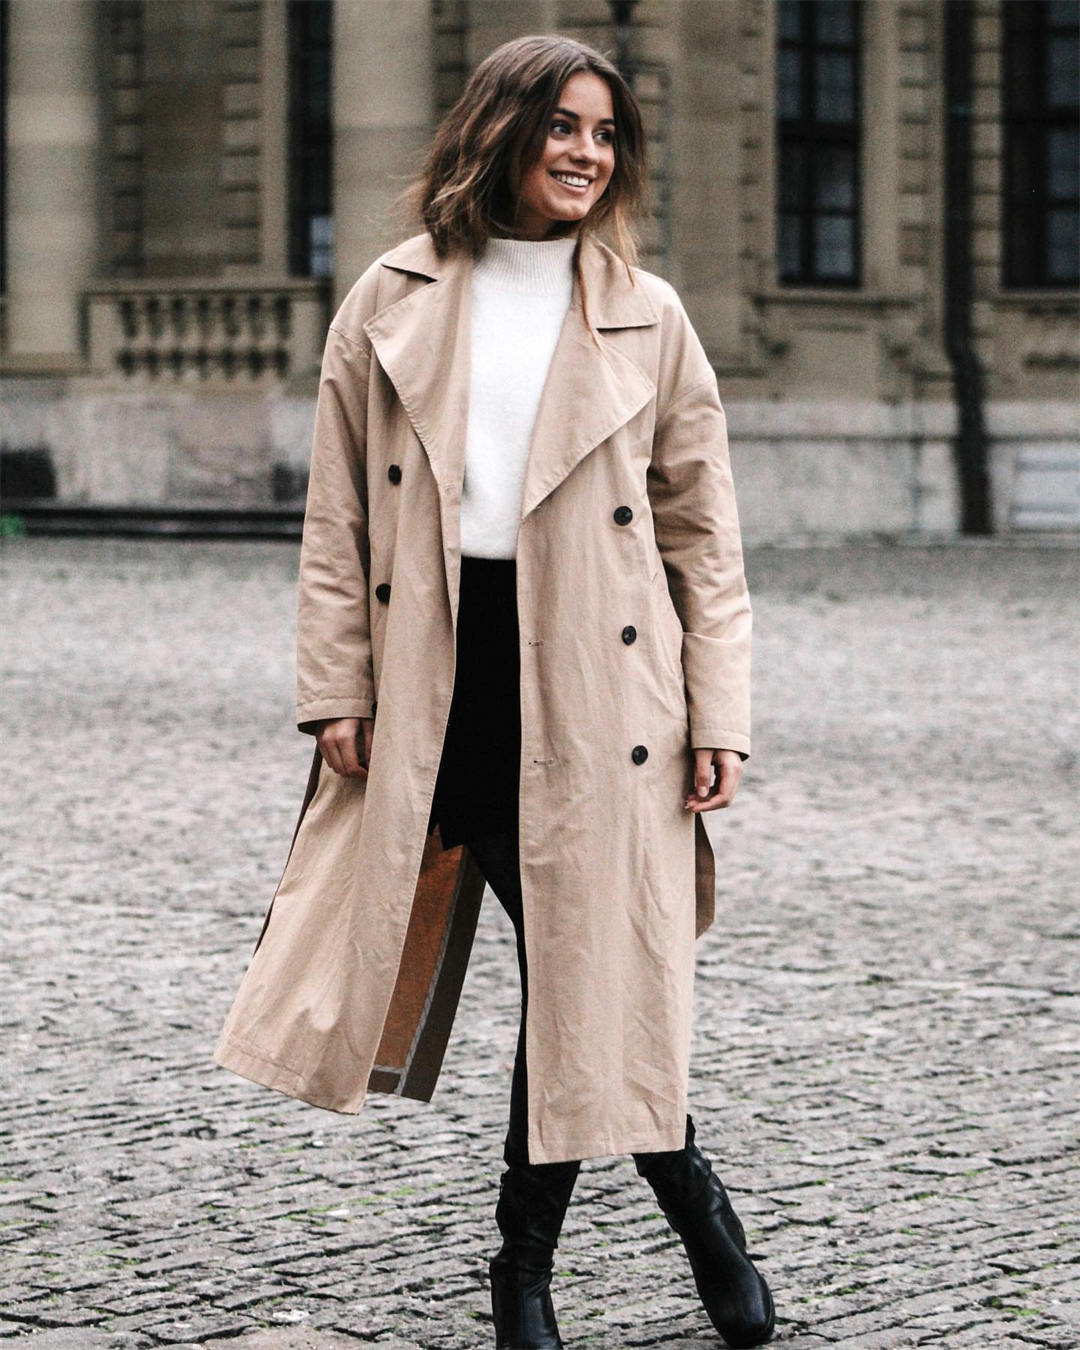 Trench Coat outfit ideas for women 68